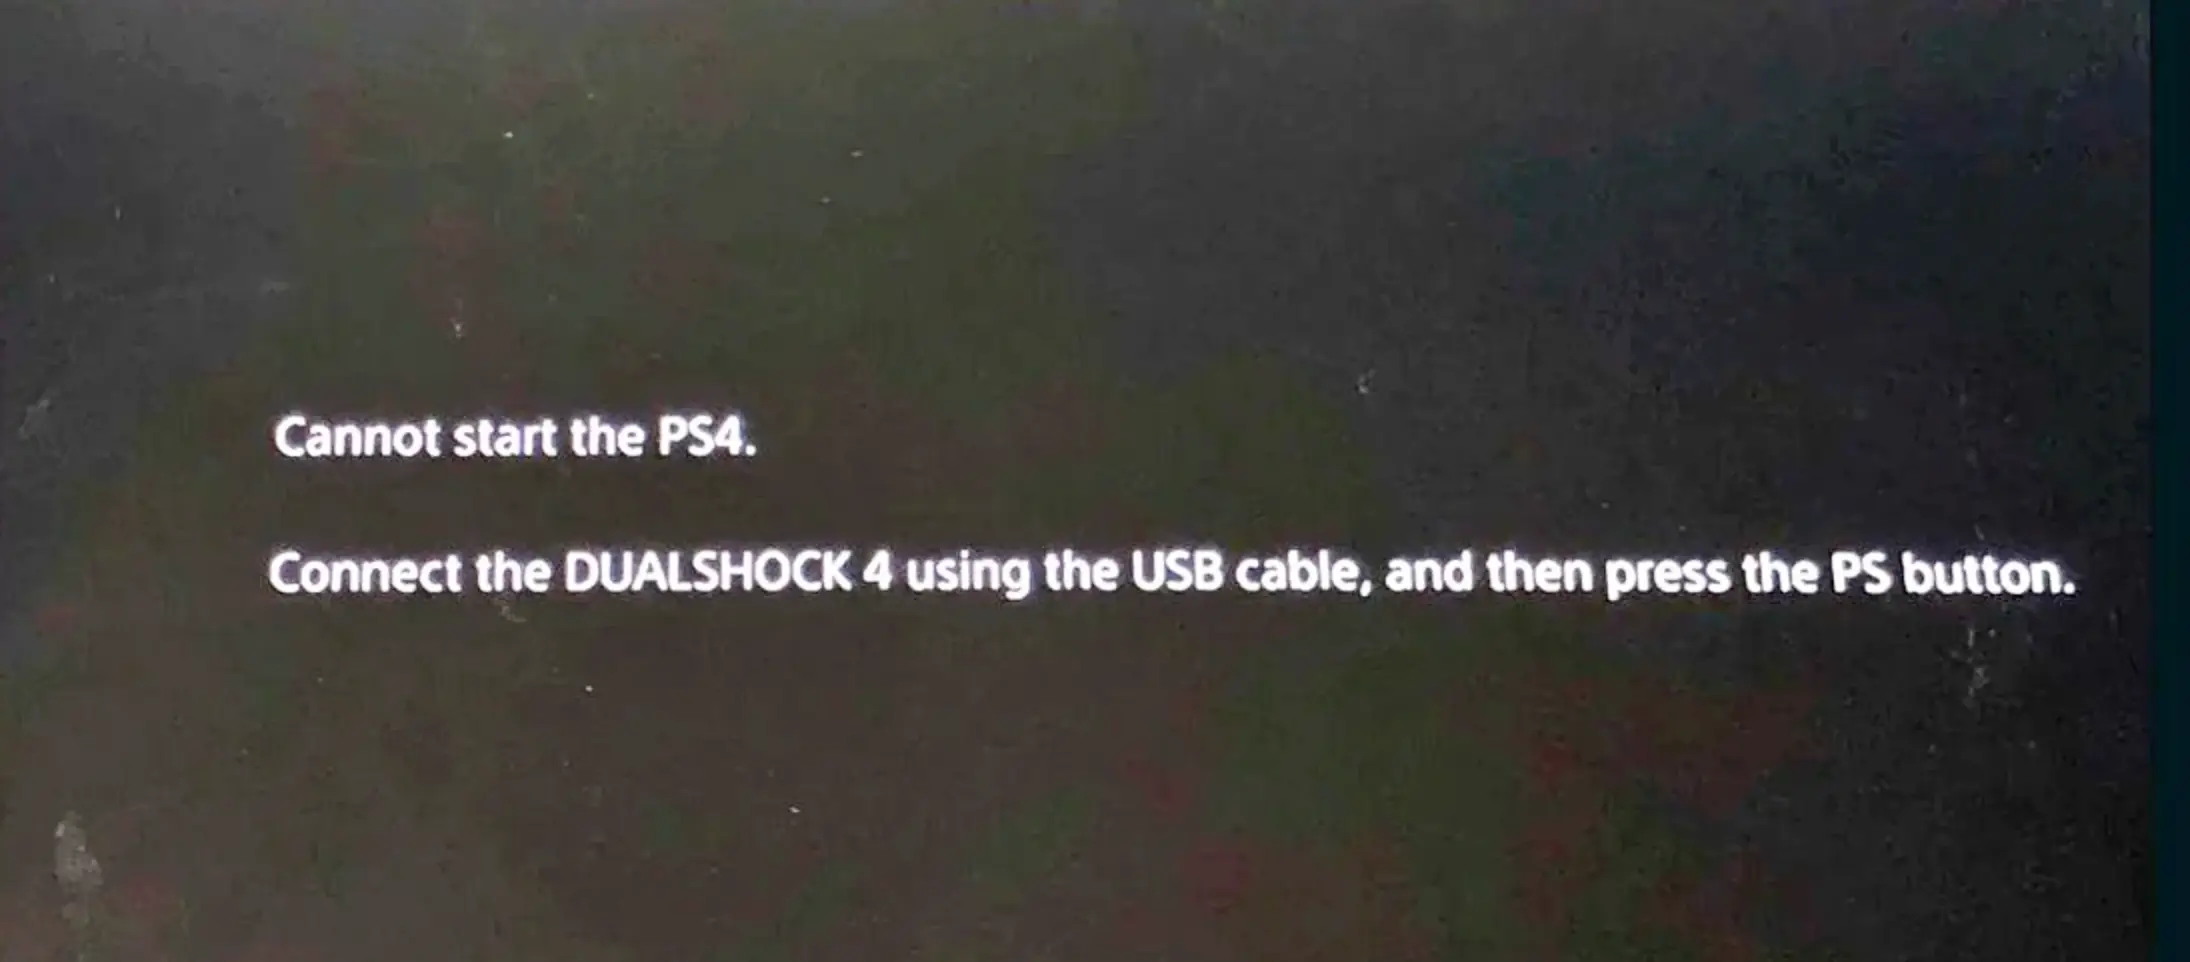 Cannot start the PS4. Connect the DUALSHOCK 4 using the USB cable, and then press the PS button